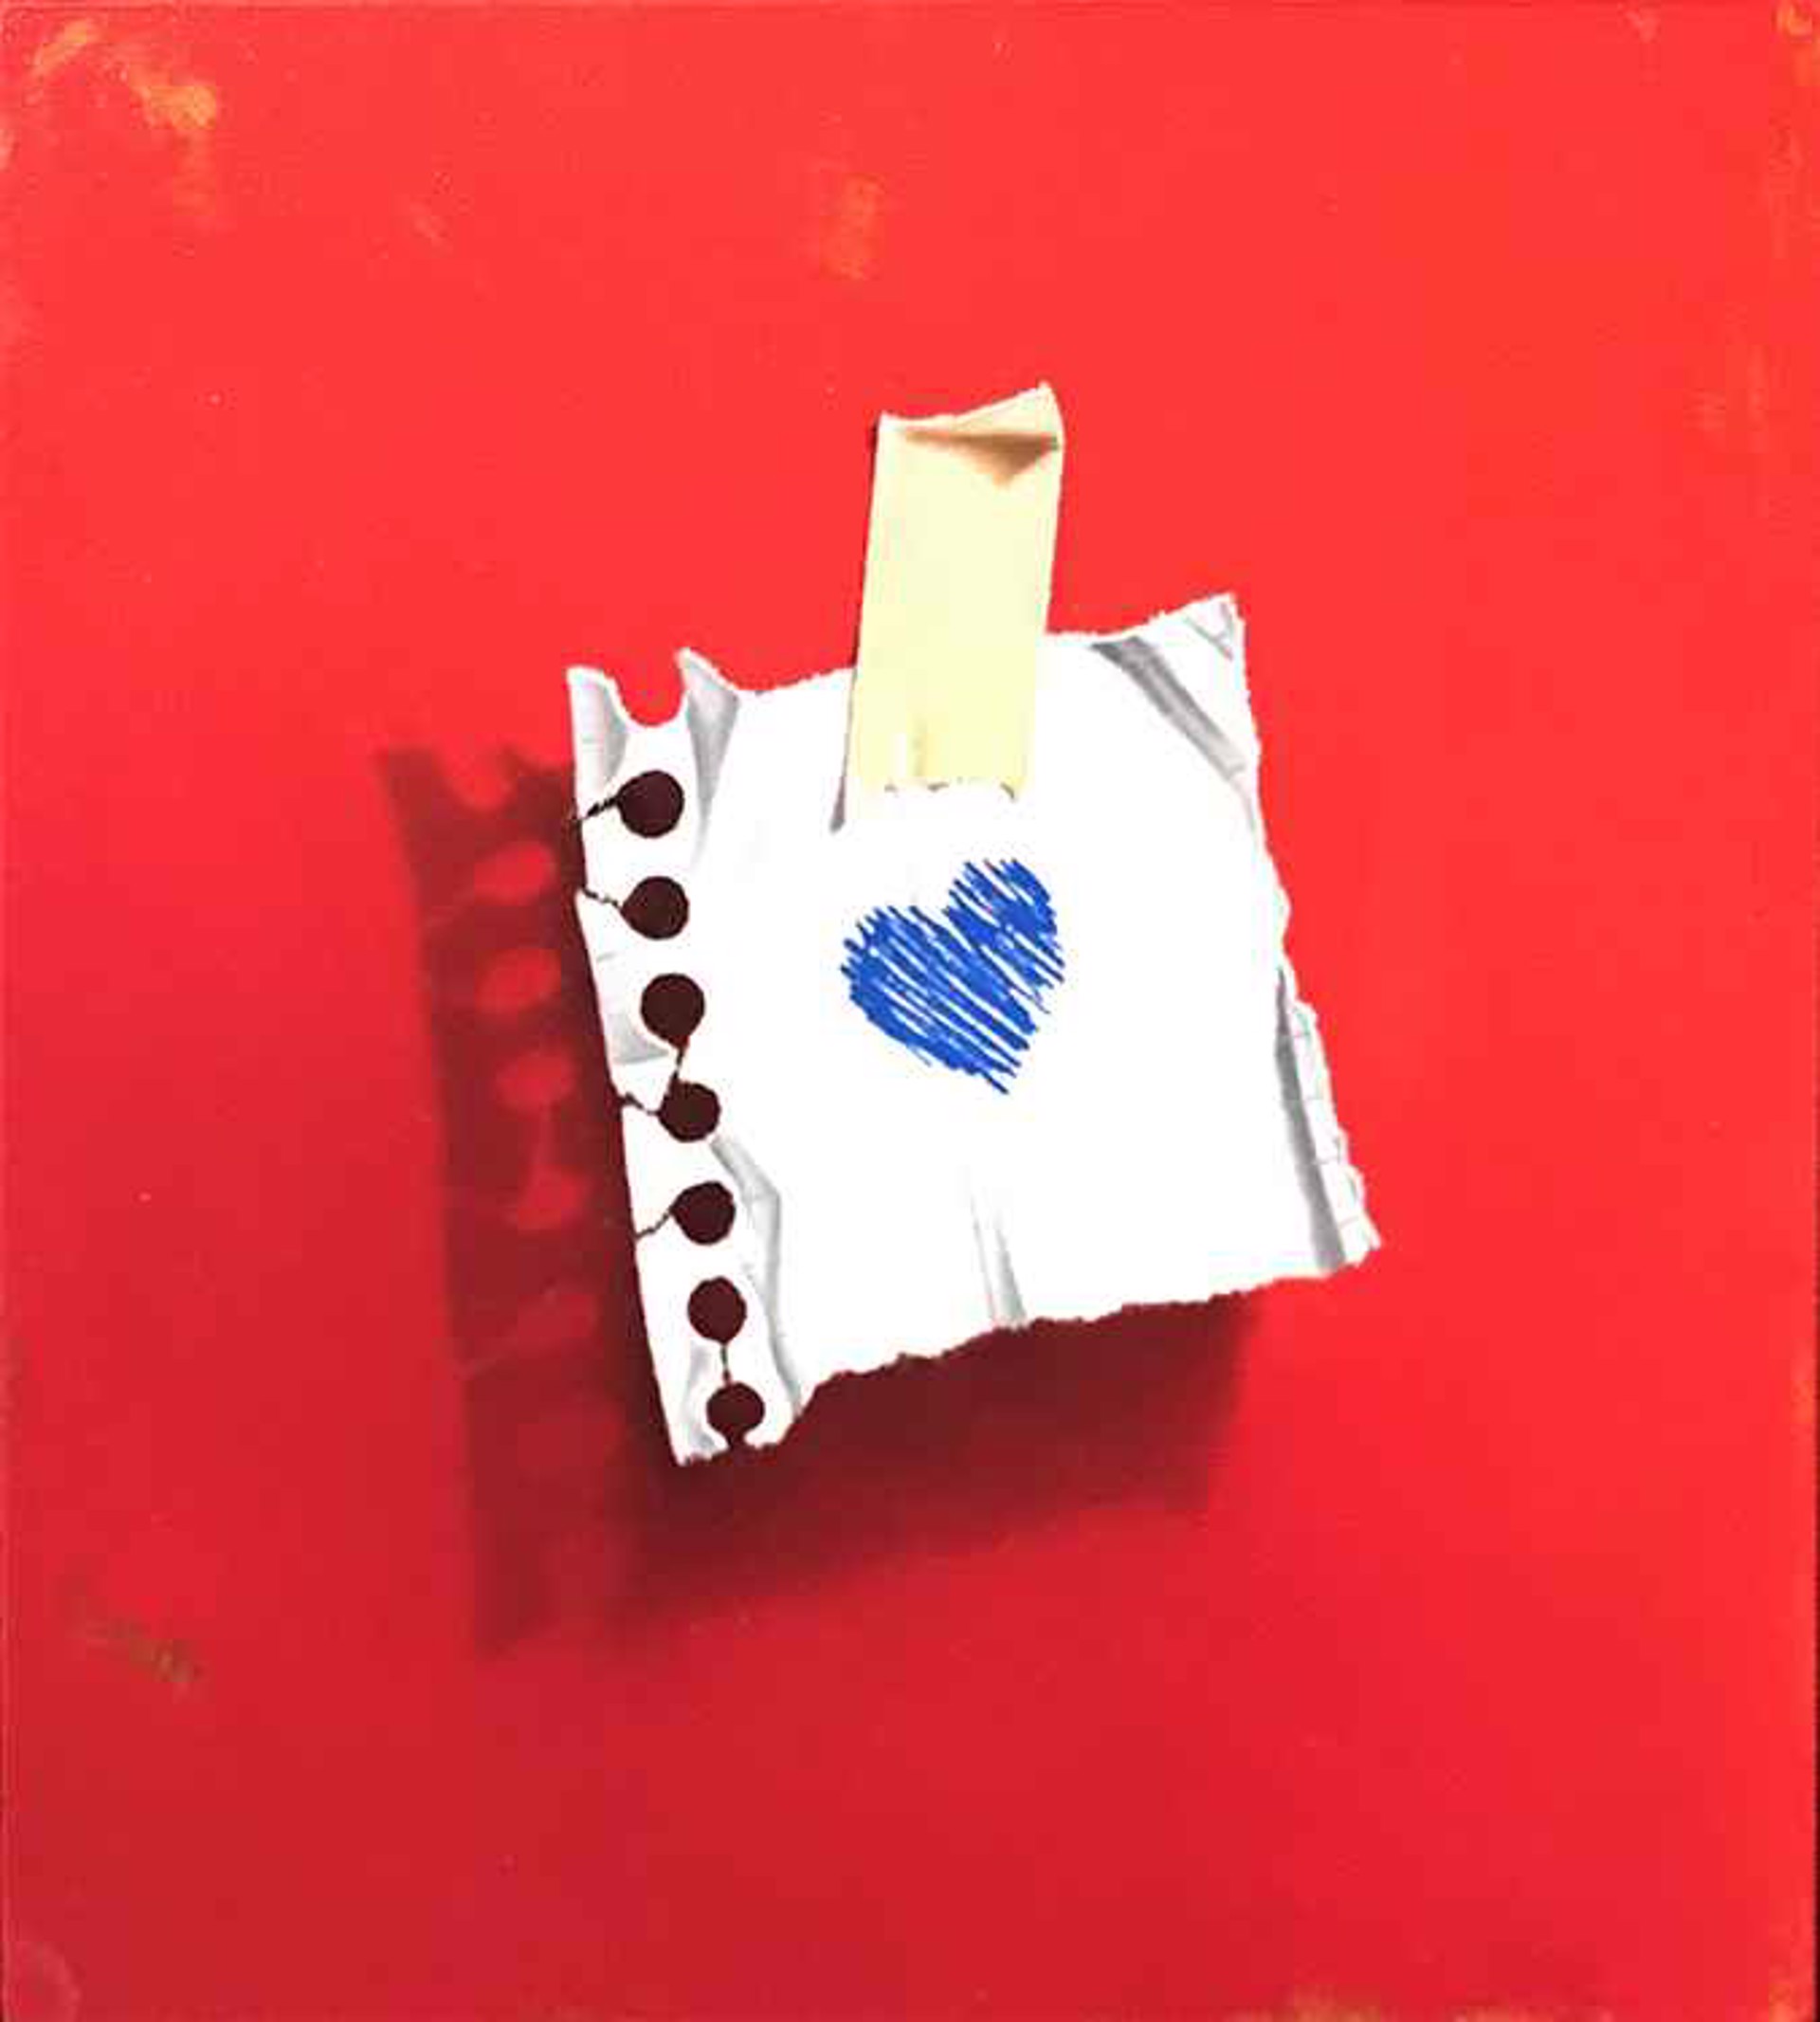 Blue Heart, Love Note by Otto Duecker